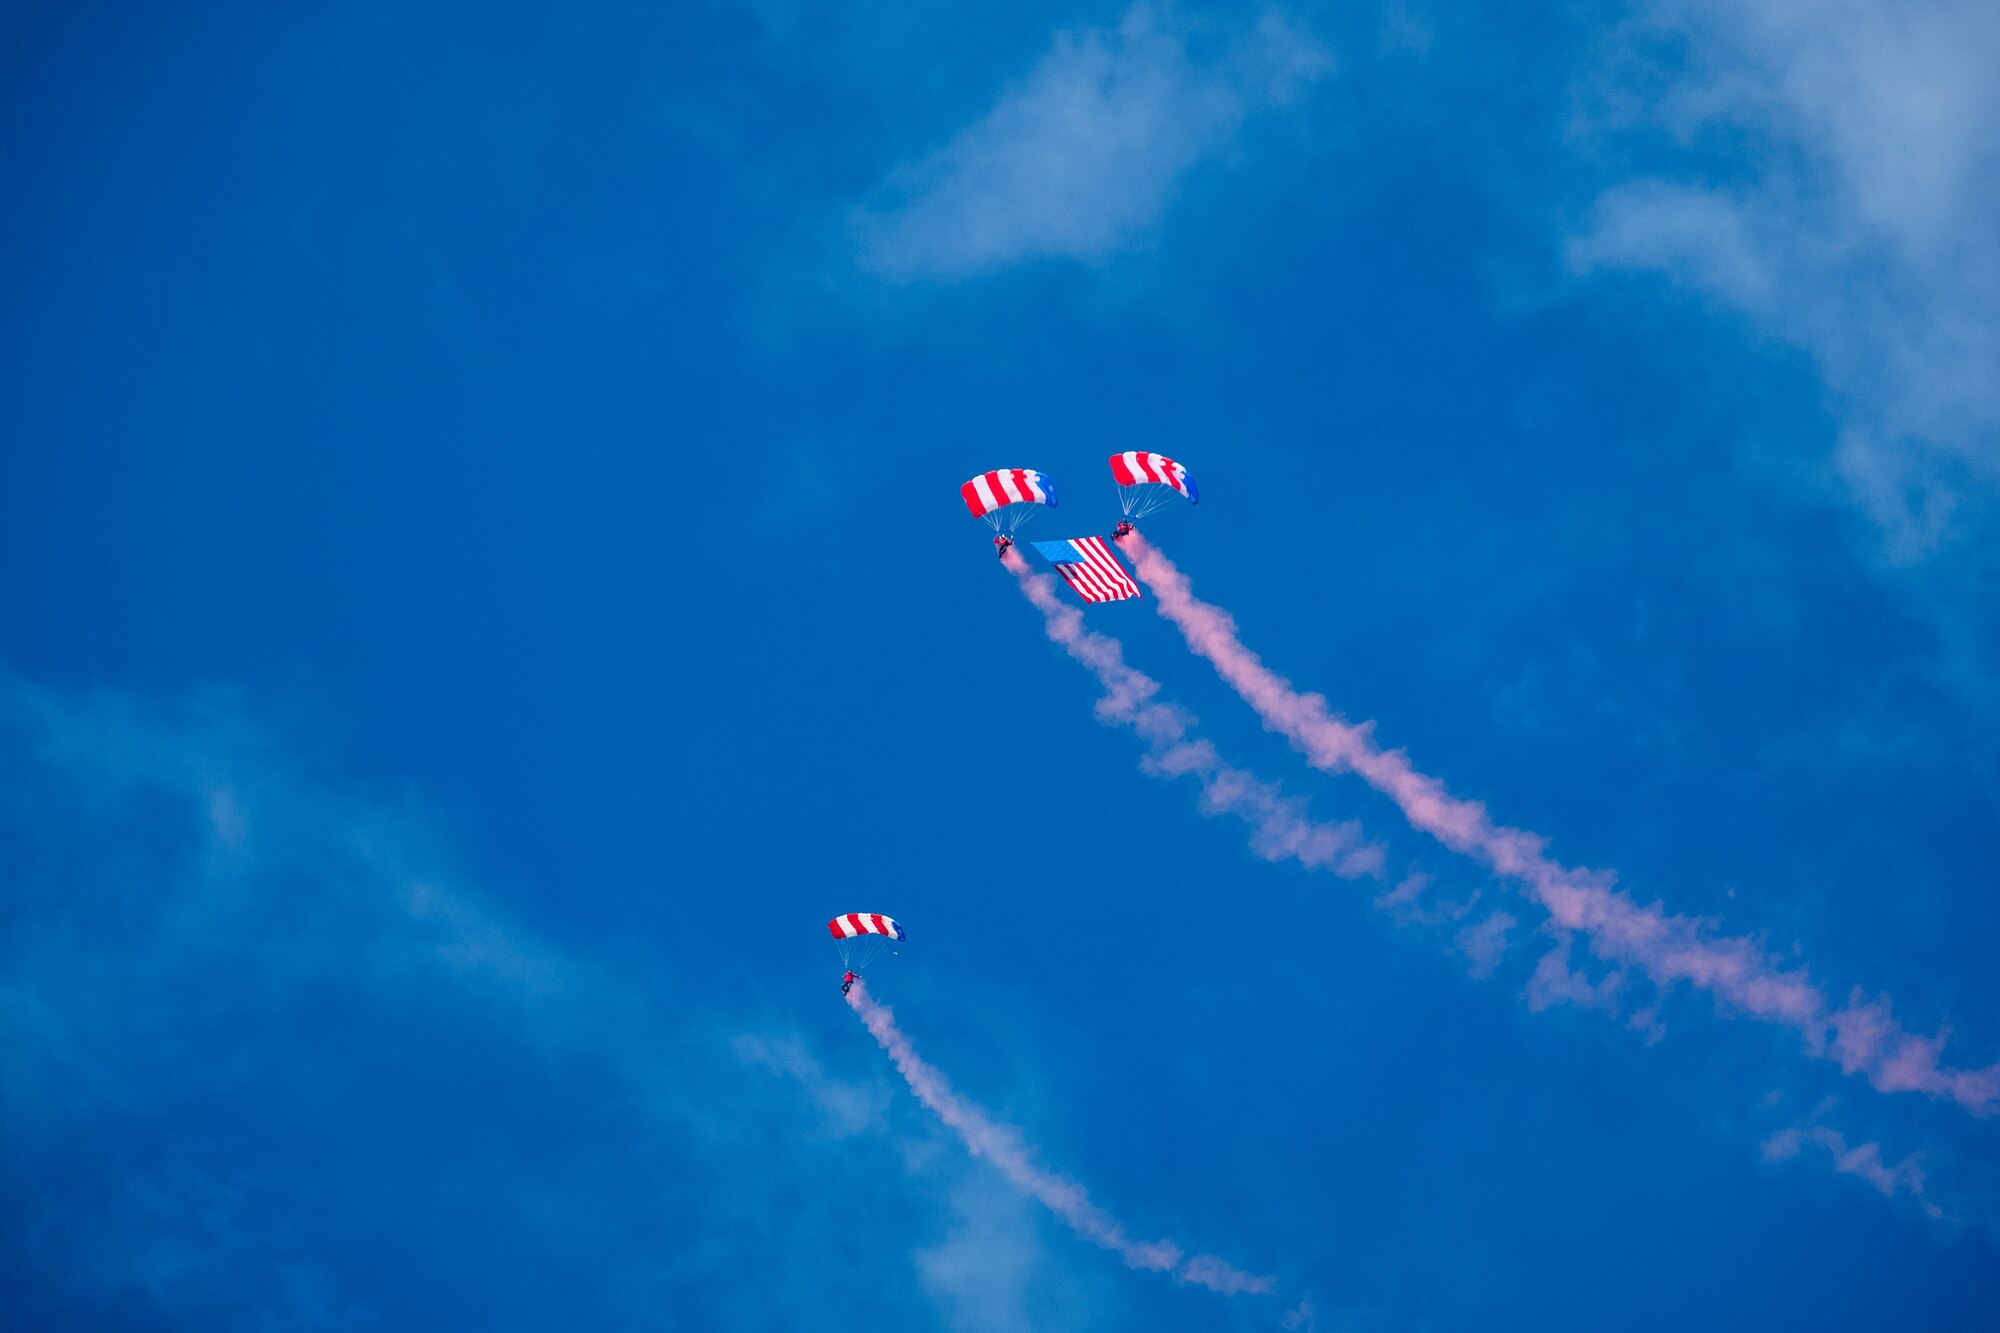 The Patriot Parachute Team glides over spectators at the Frontiers in Flight Open House and Airshow Sept. 9, 2018, McConnell Air Force Base, Kan. Veteran owned and operated, the Patriot Parachute Team’s mission is to inspire the next generation of patriots and to raise awareness for various Veteran causes. (U.S. Air Force Photo by Staff Sgt. Preston Webb)